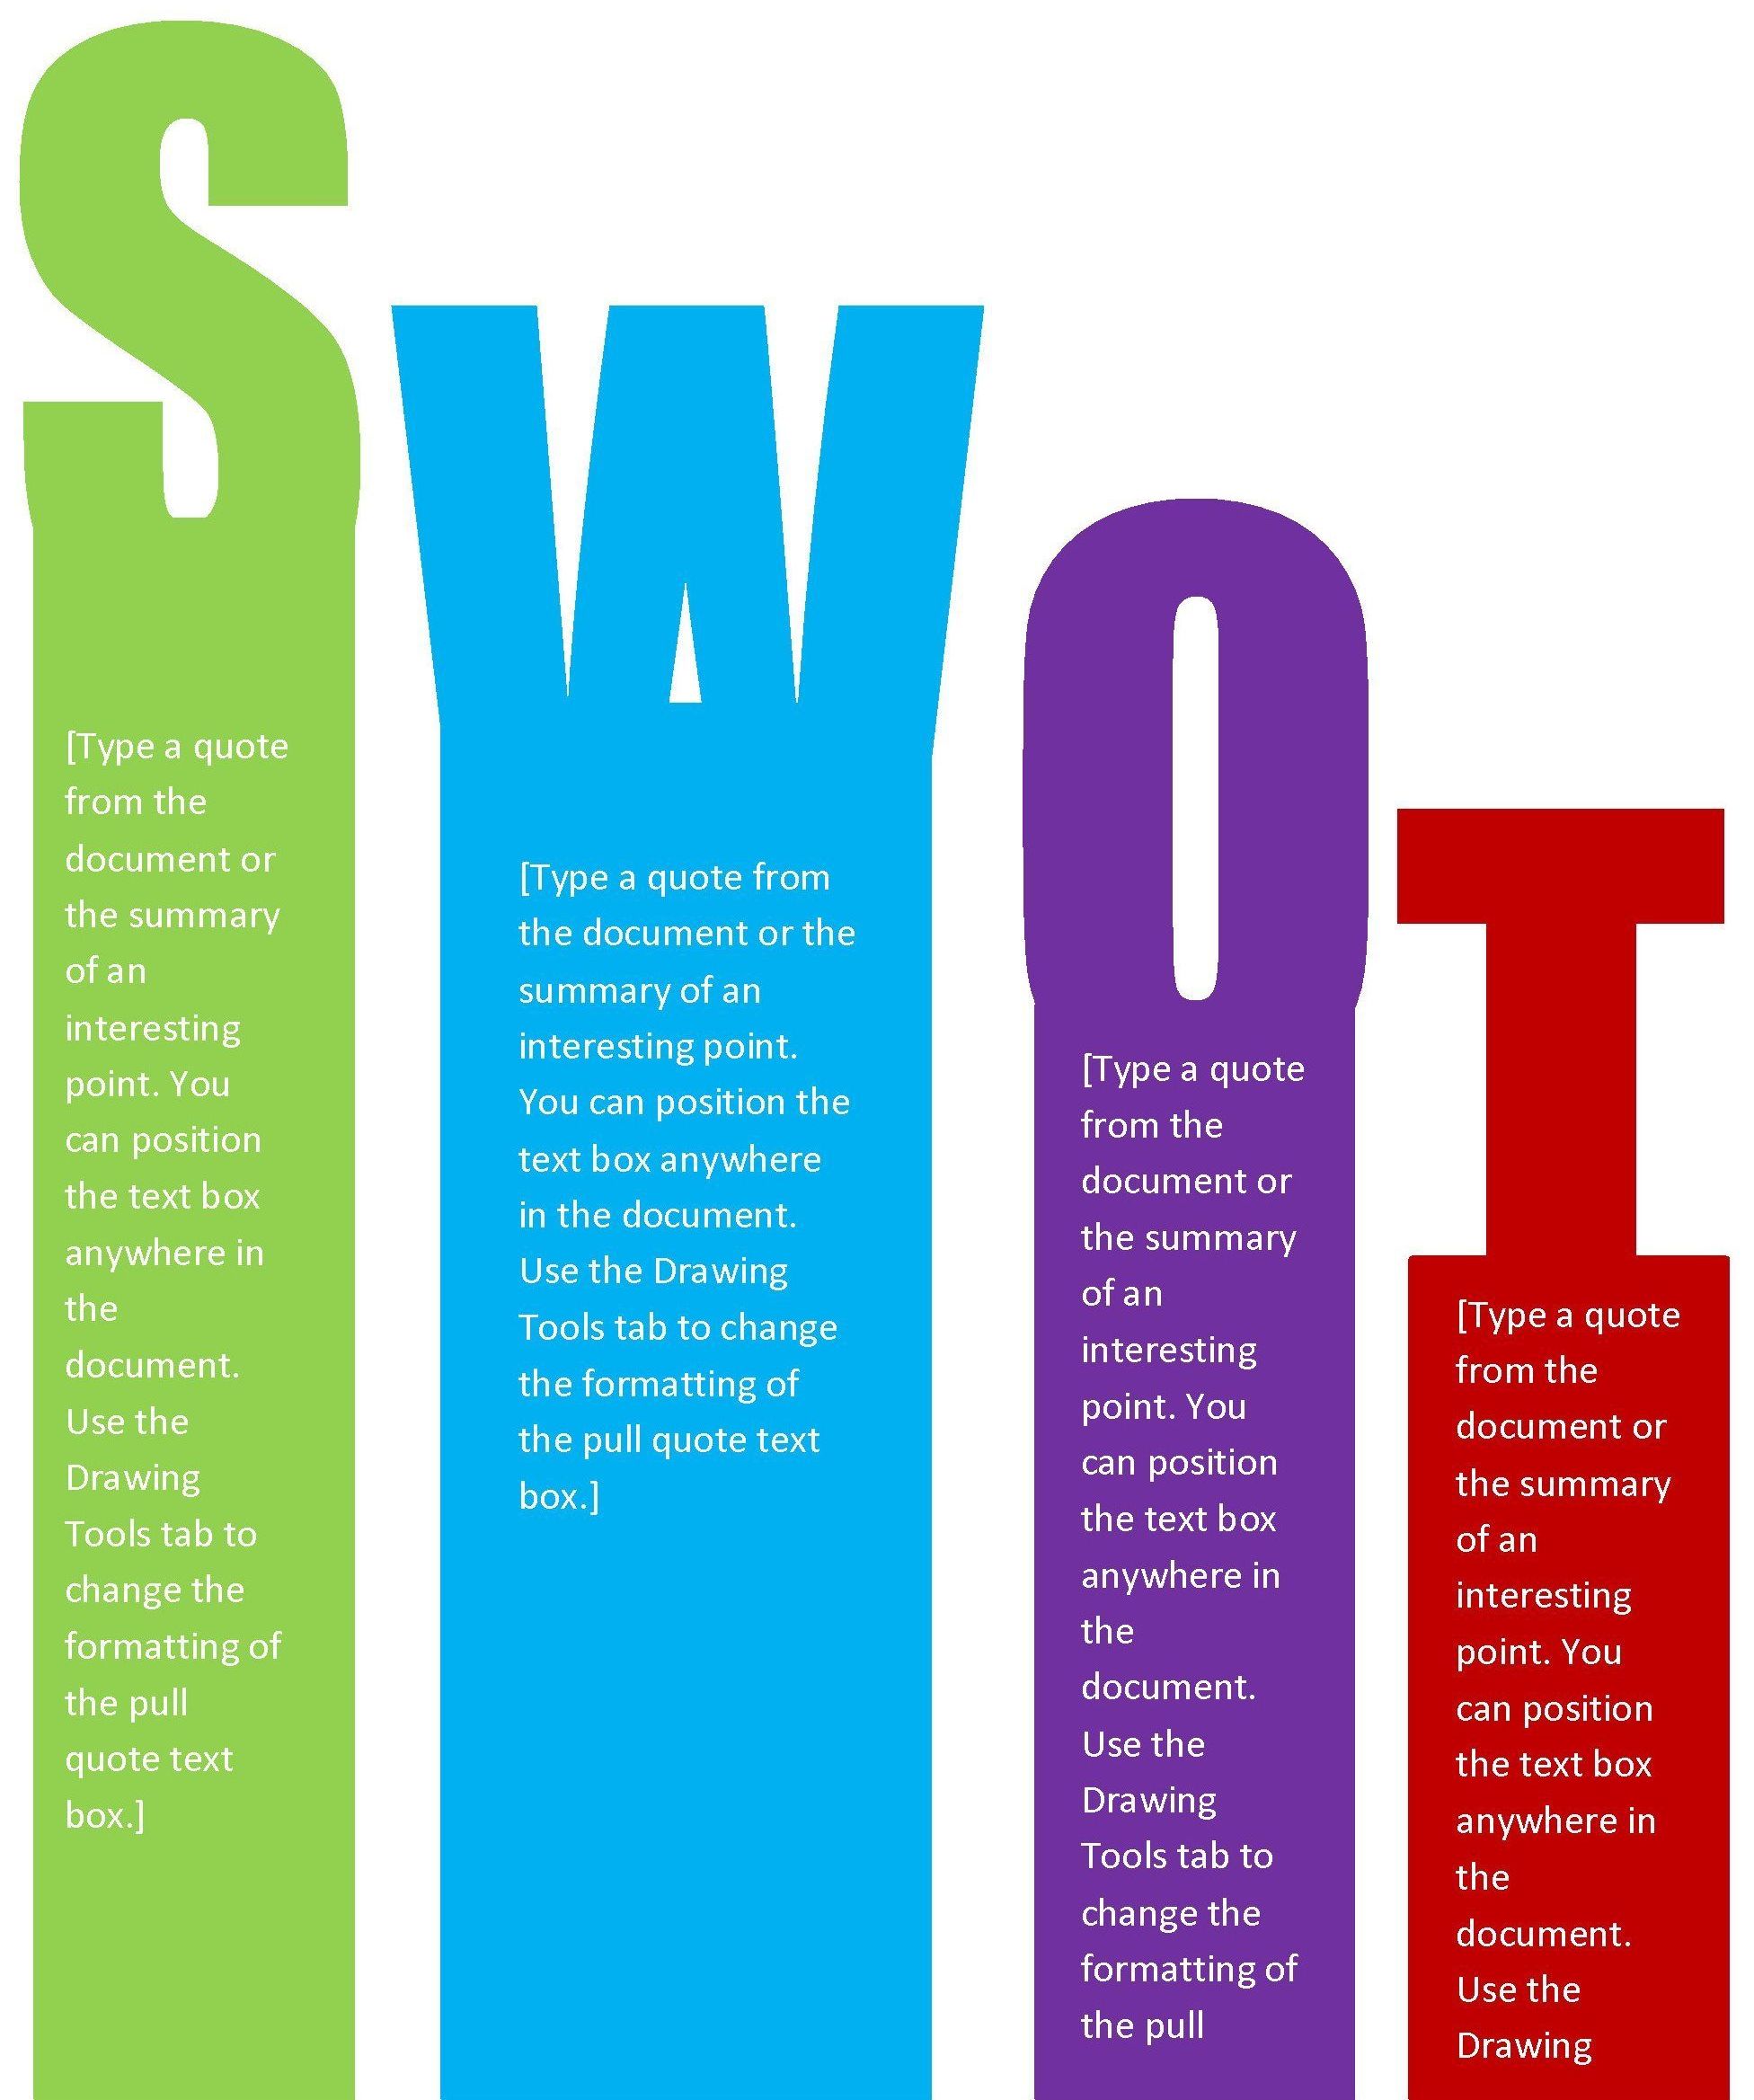 Swot Template For Word